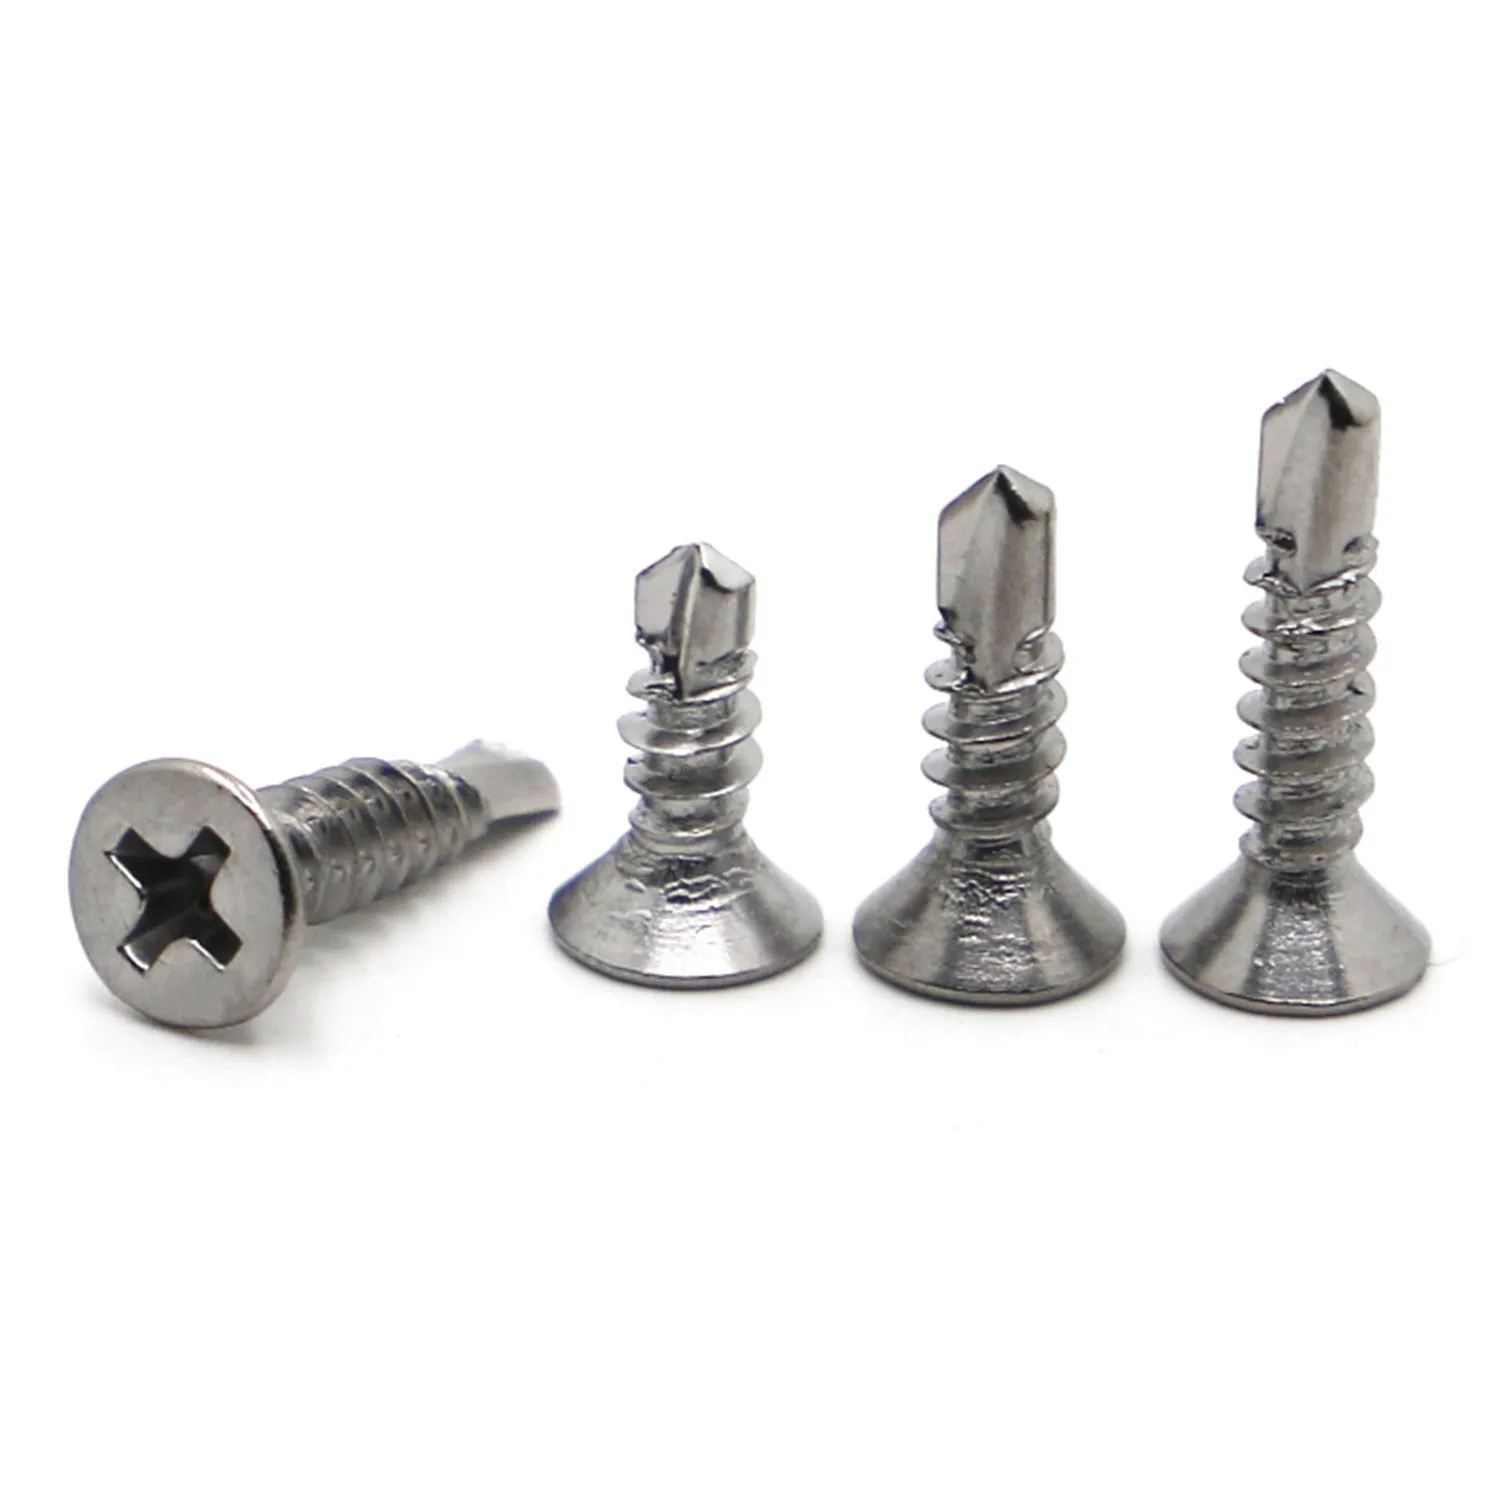 

M3.5 M4.2 M4.8 M5.5 M6.3 410 Stainless Steel Phillips Flat Head Self-drilling Screw Self-tapping Dovetail Screw